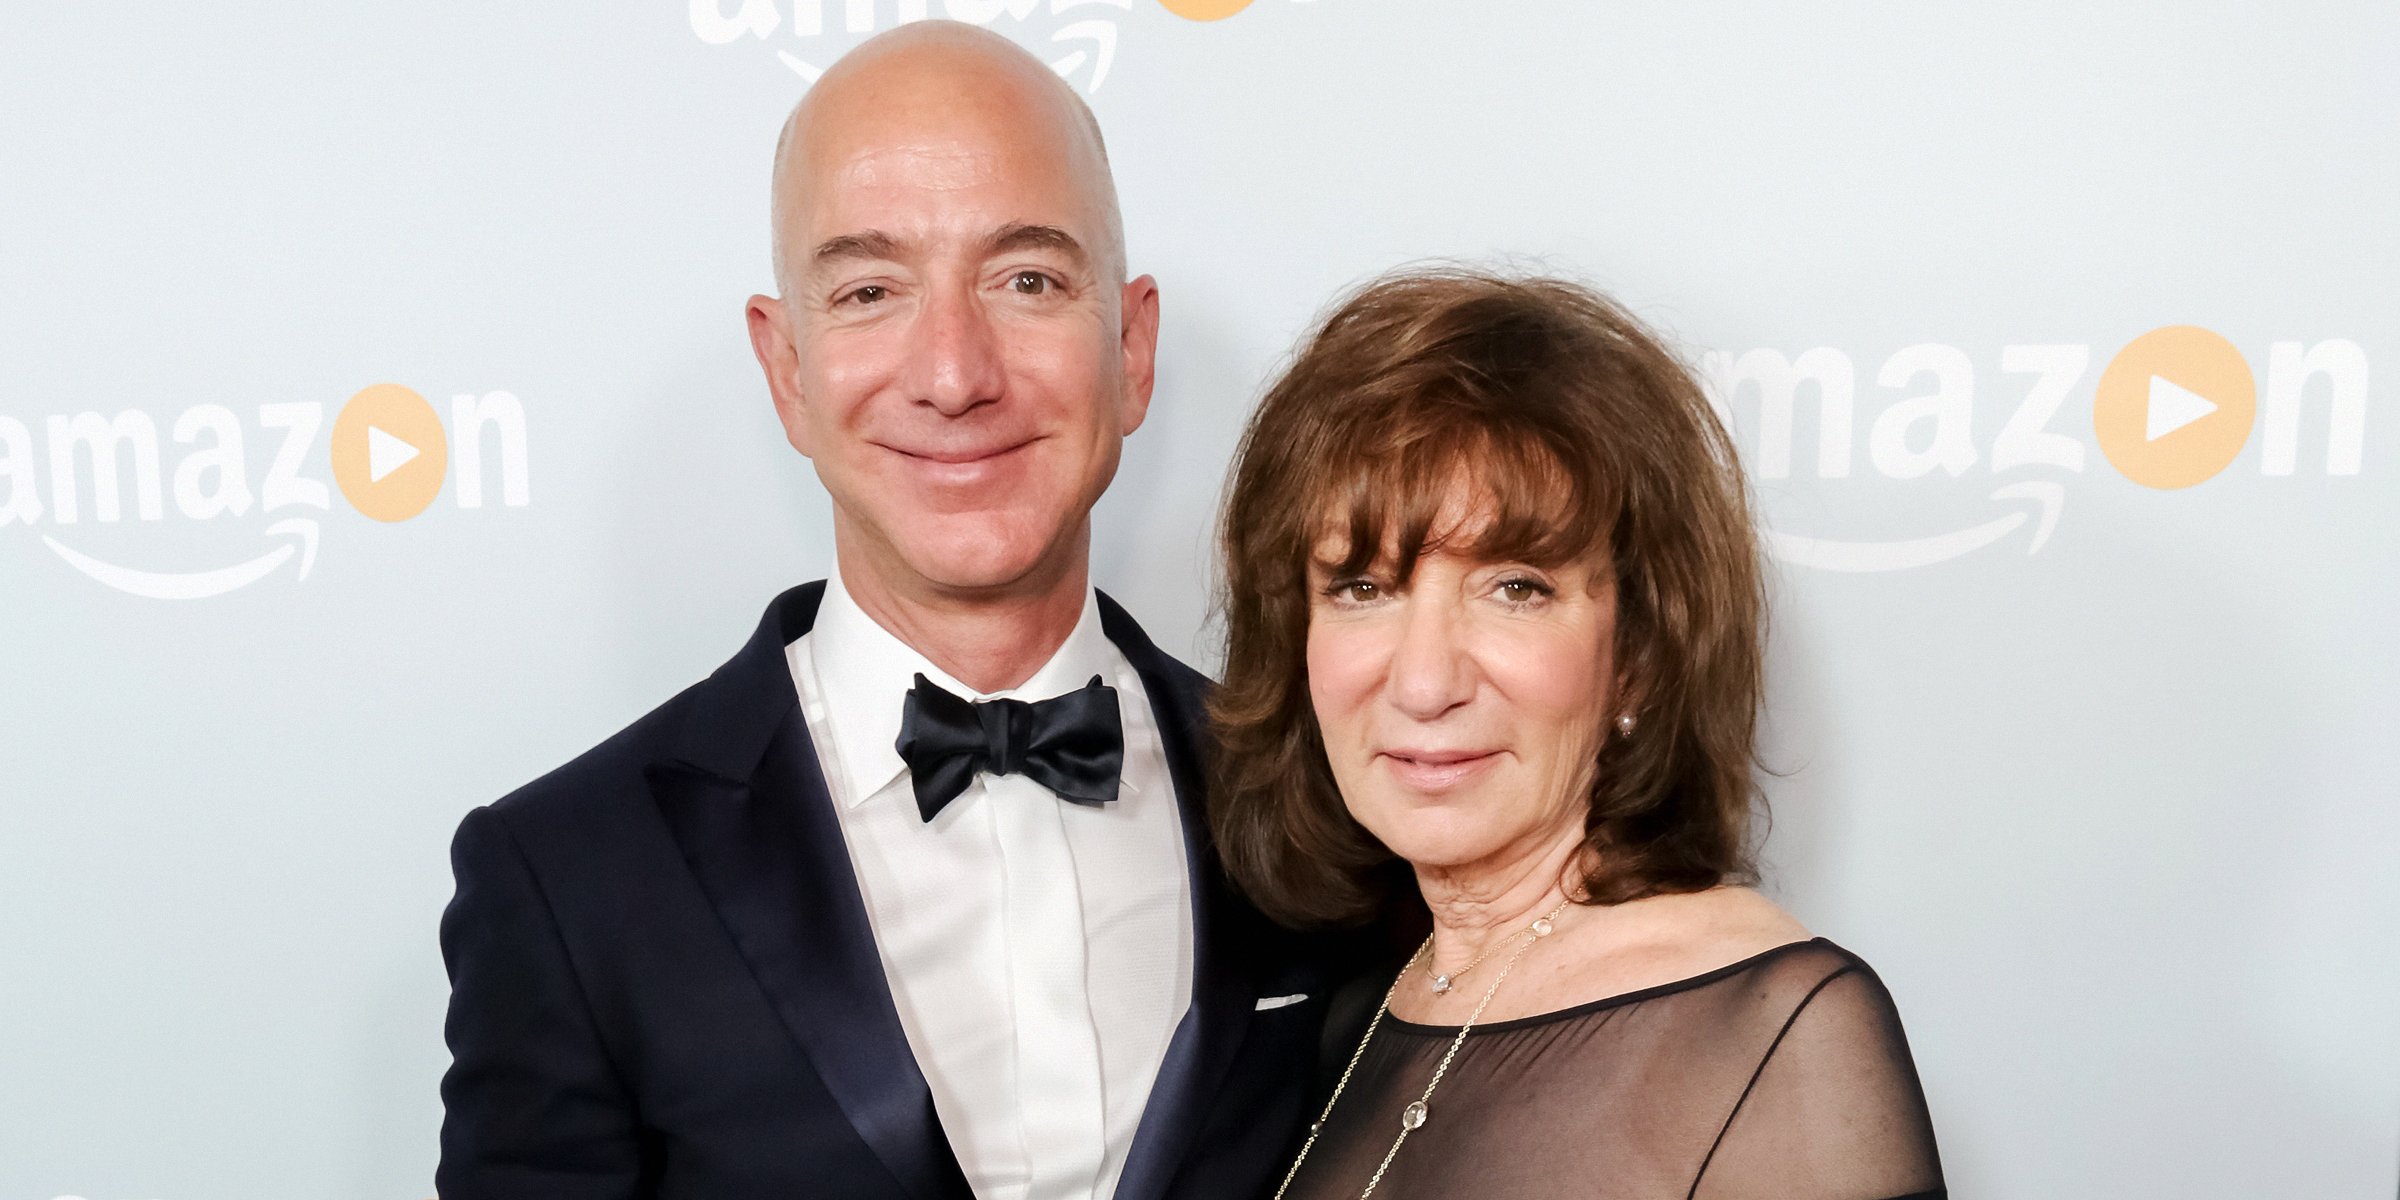 Jeff Bezos and His Mother Jacklyn Bezos | Source: Getty Images